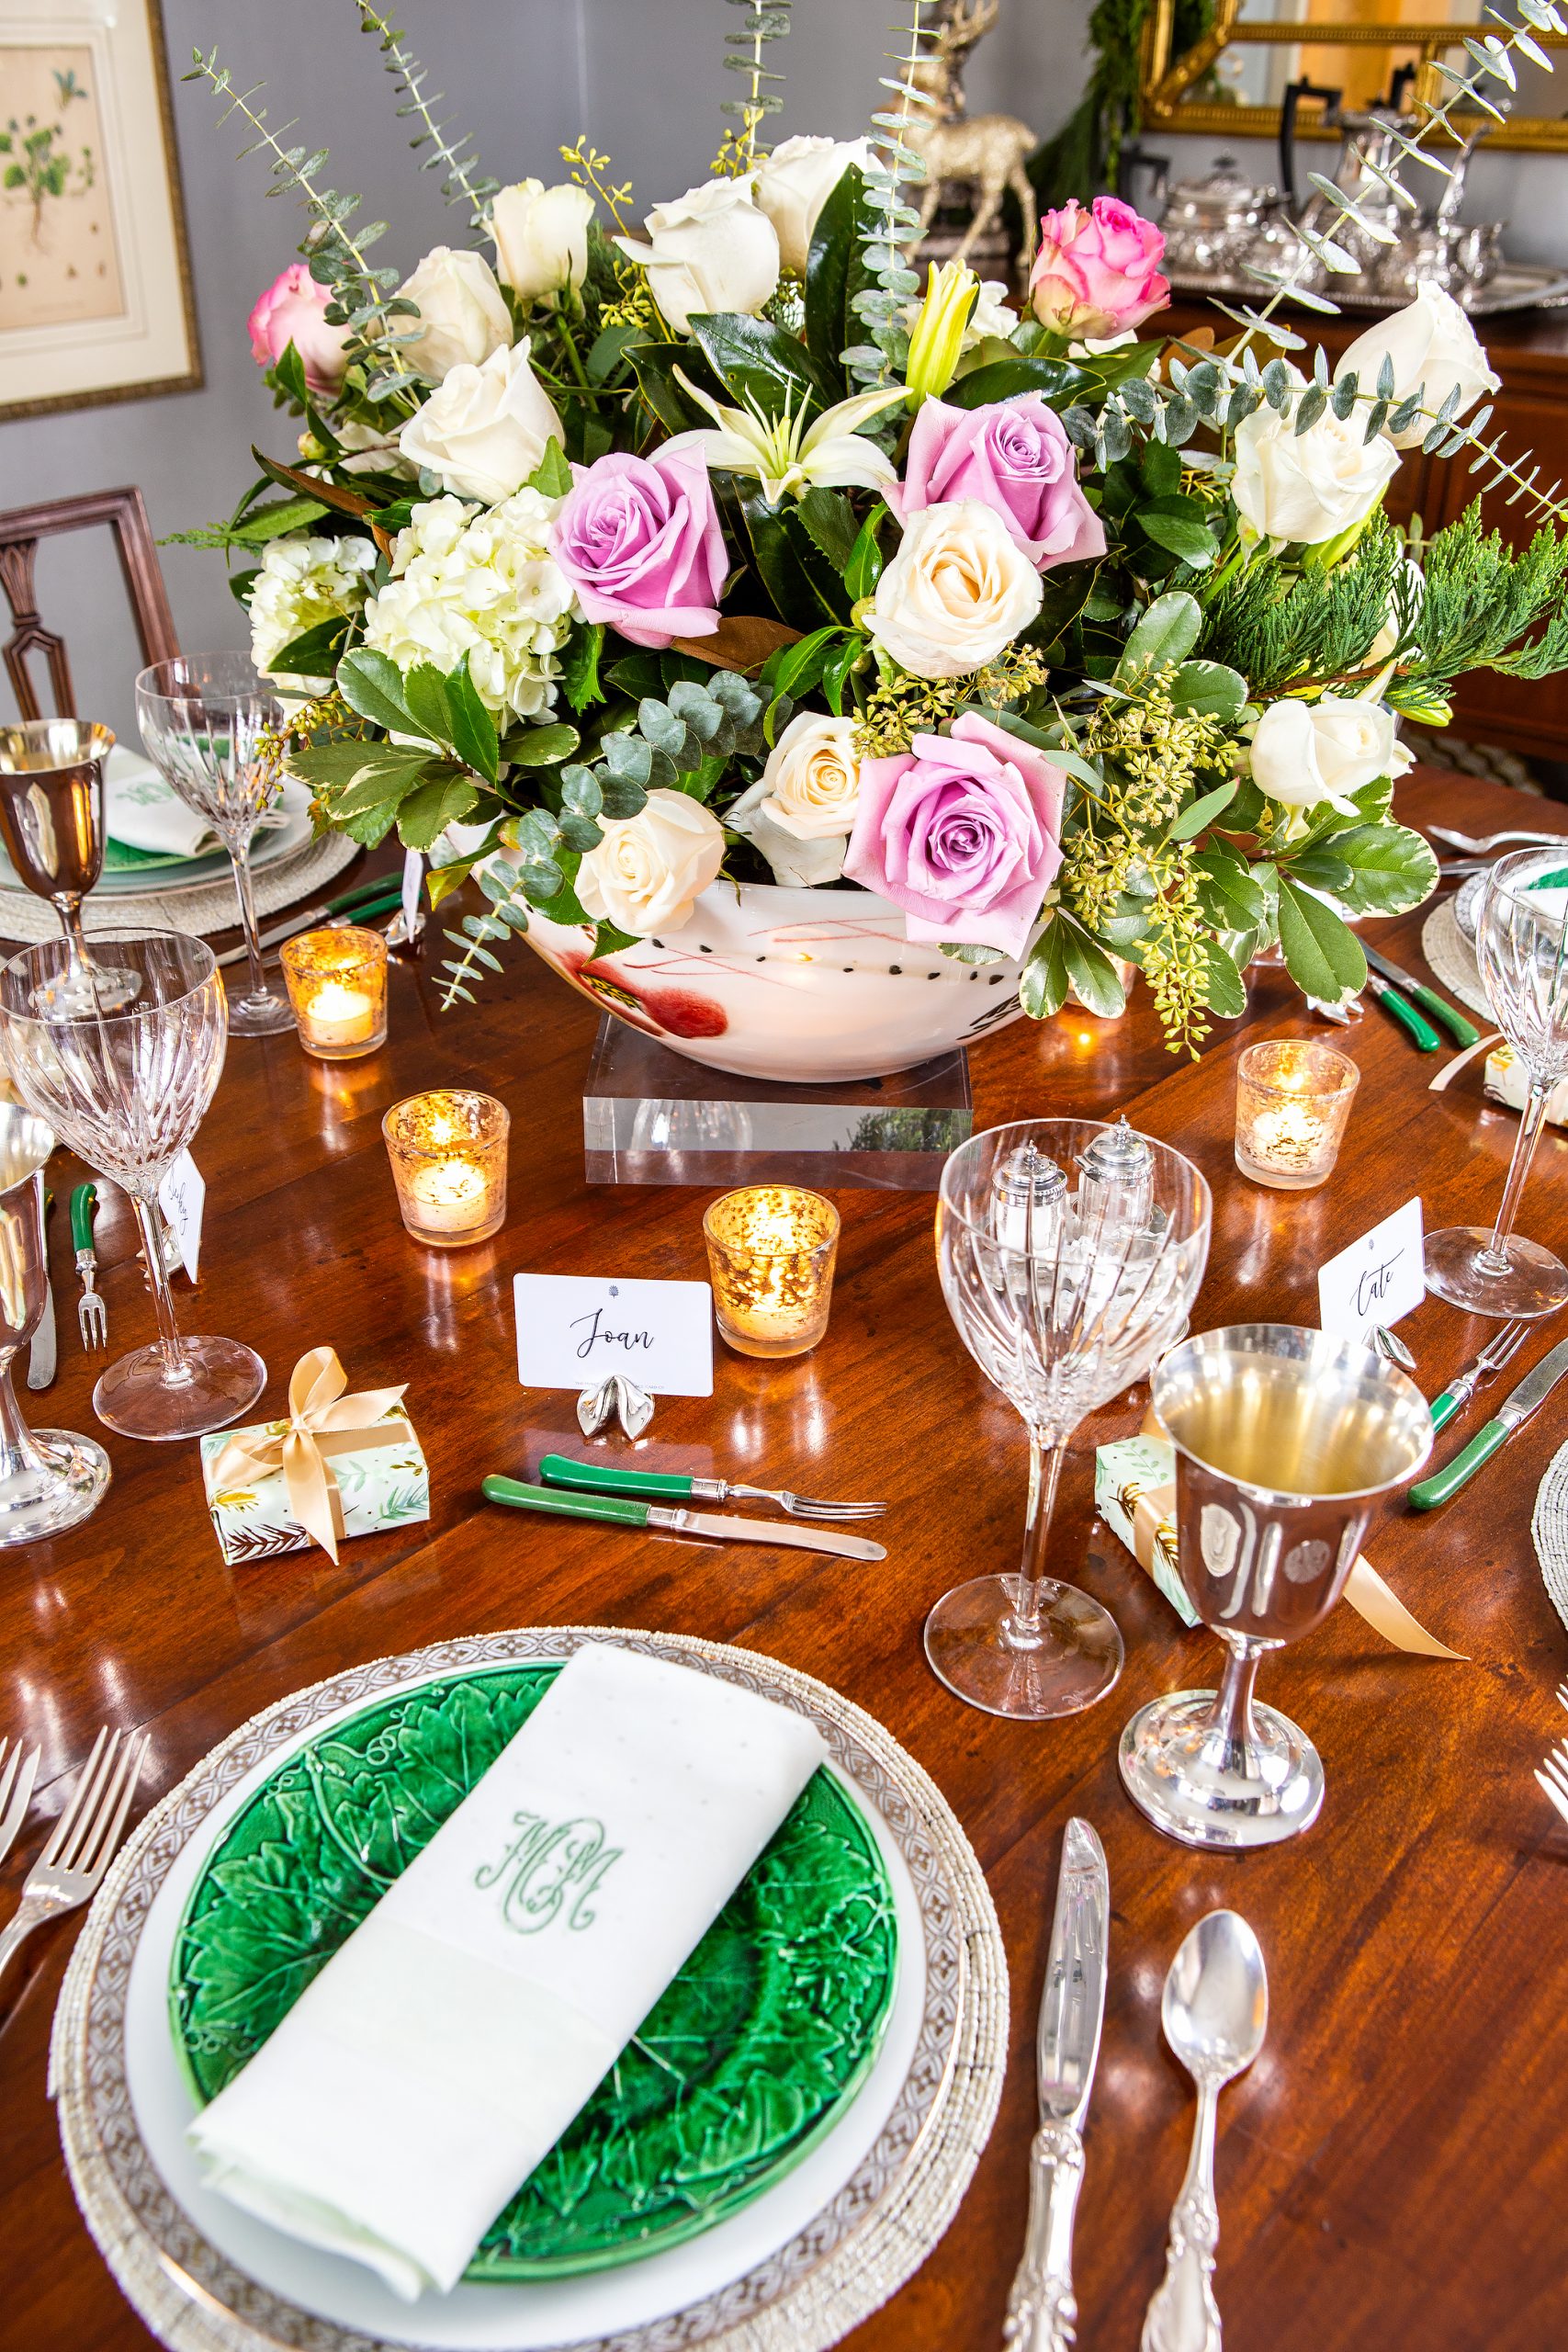 Catherine and Hank Mabry set two tables at Christmas, one in the dining room and one in the entrance hall. Using nontraditional colors, Catherine starts with a set of antique monogrammed napkins on a majolica plate and a gorgeous arrangement of roses and lilies. She uses her grandmother’s silver wine goblets and sprinkles around small wrapped boxes that her family call “phantom circes.” 